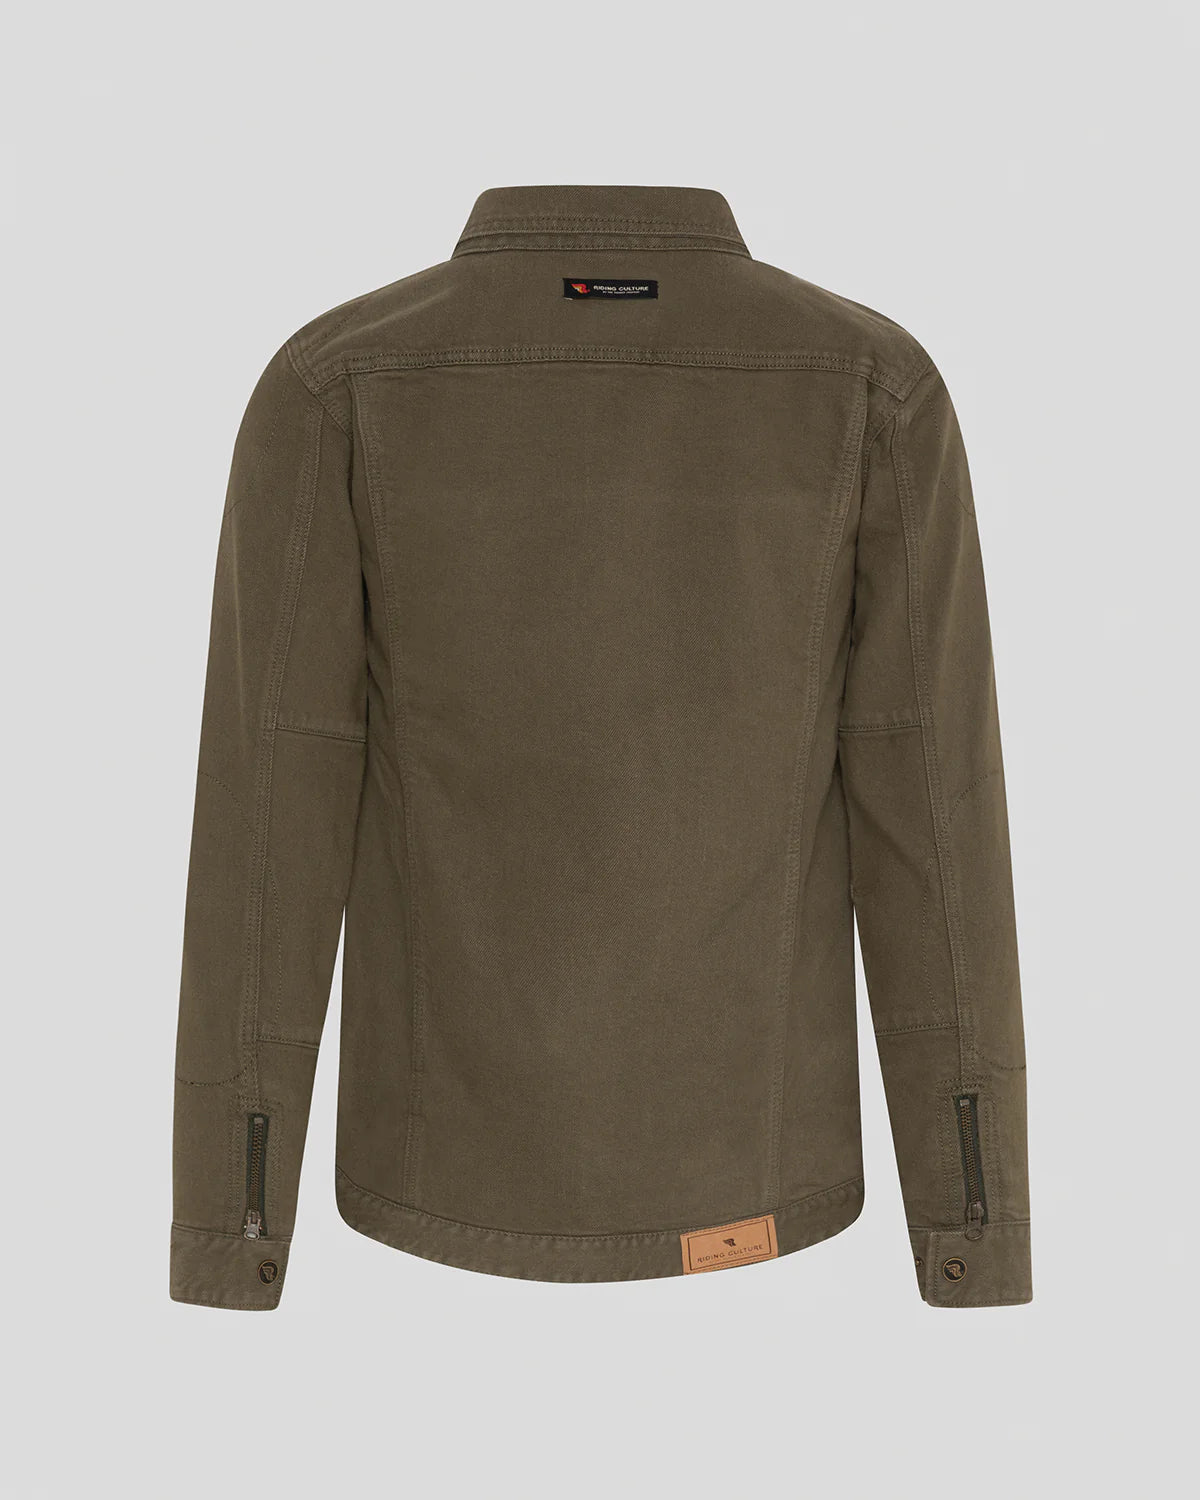 Riding Culture Rider Shirt - Olive